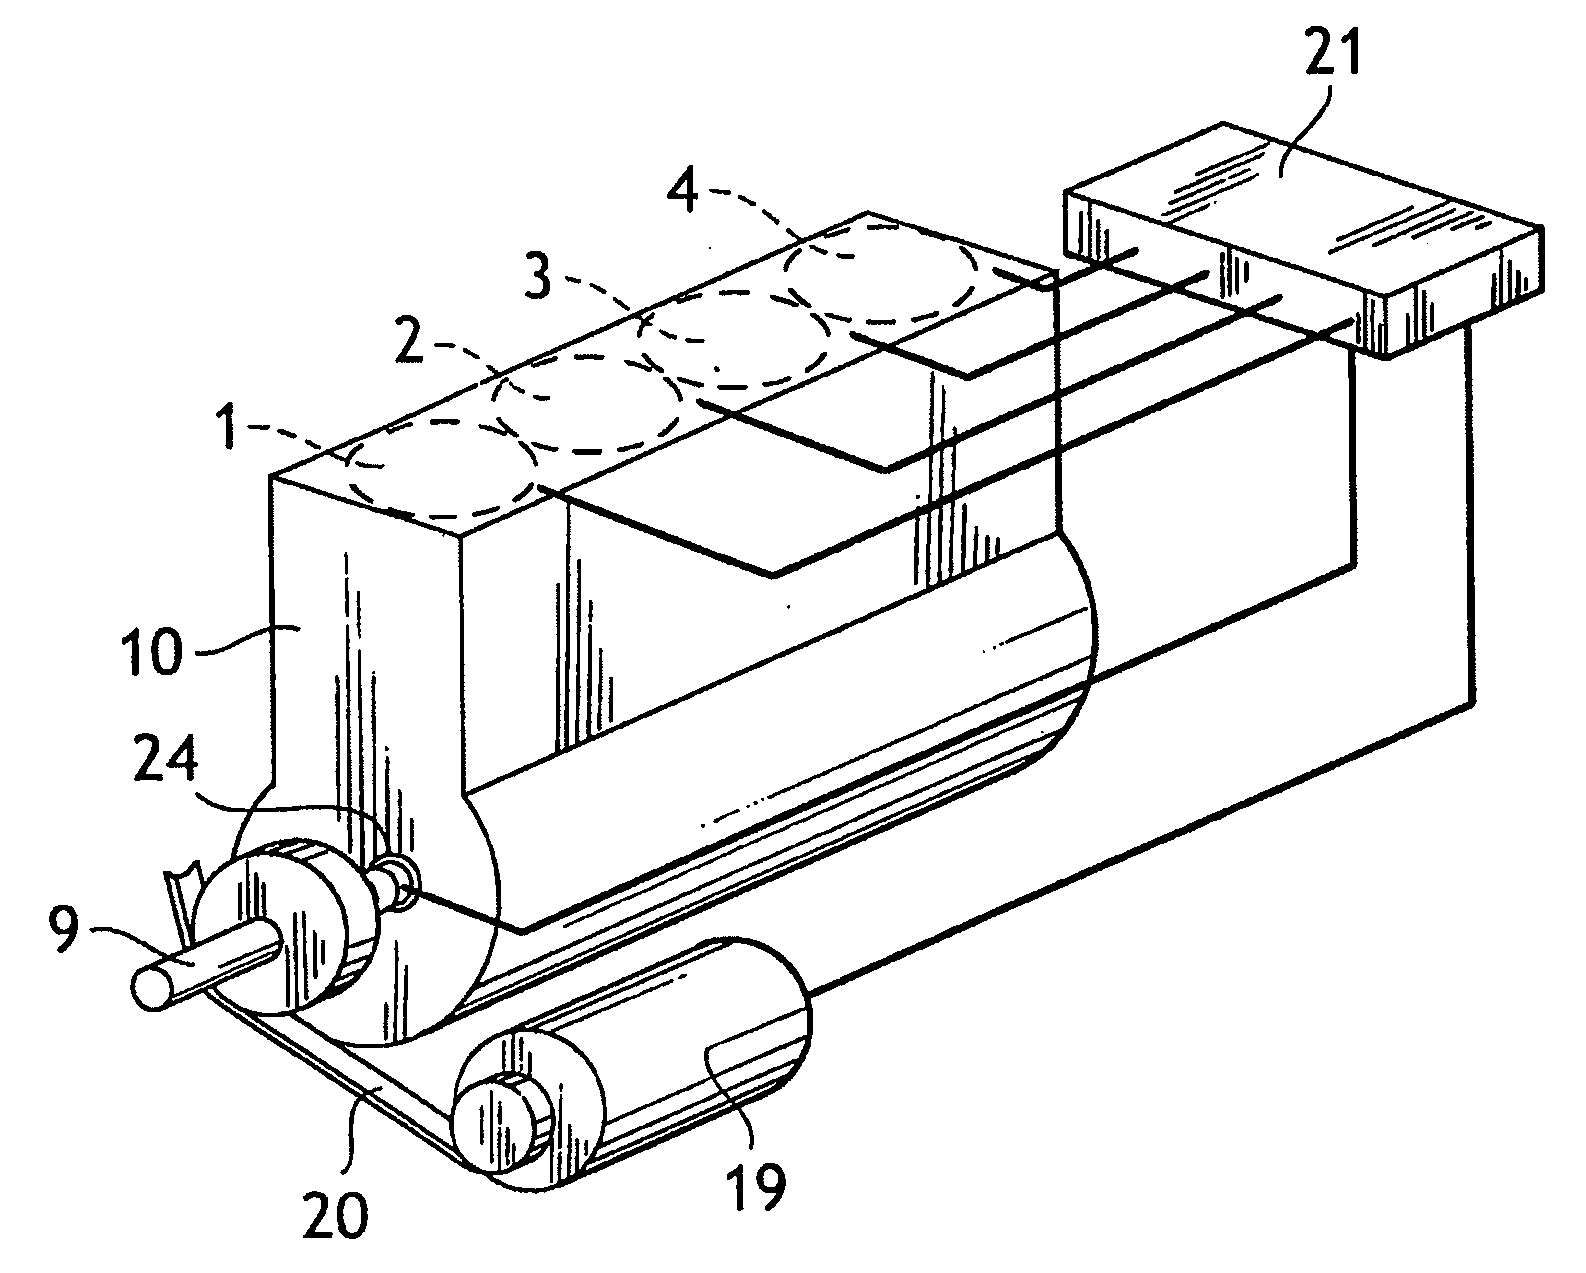 Method for managing a torque applied to an output shaft of a combustion engine when one combustion chamber is deactivated, and corresponding management system